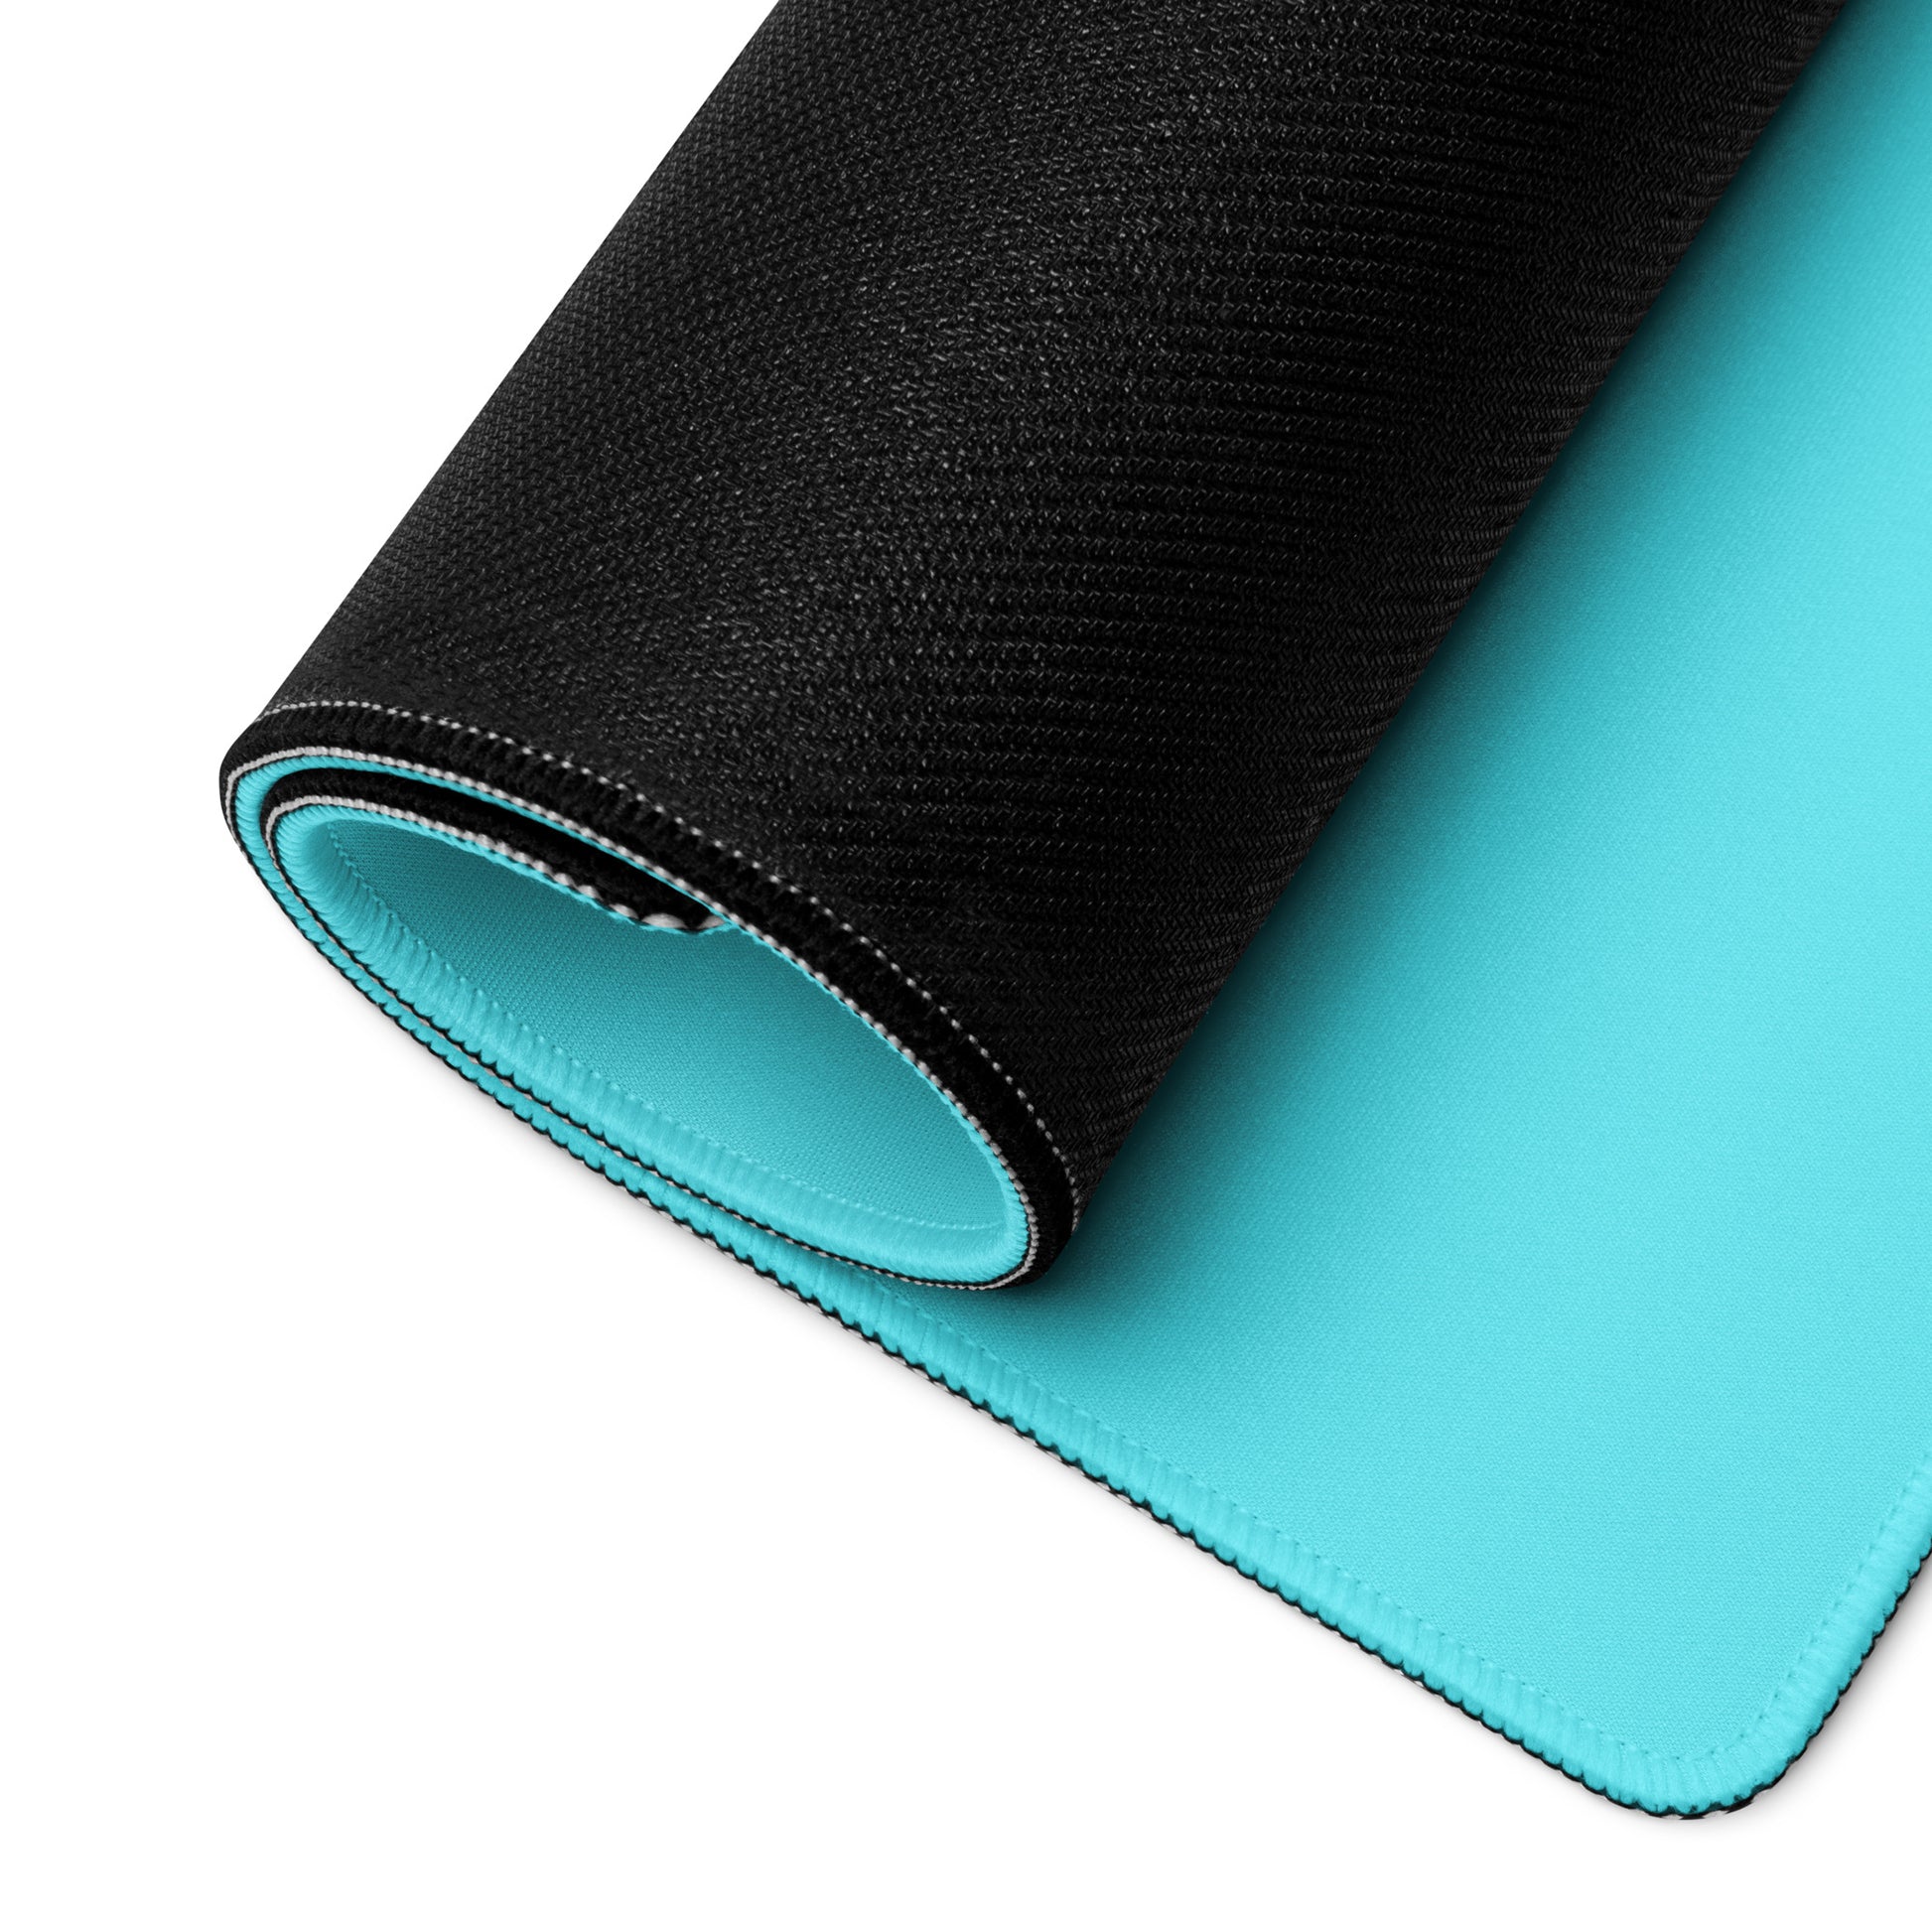 36" x 18" desk pad with a cute penguin sitting in an ice bath on it rolled up. Blue in color.